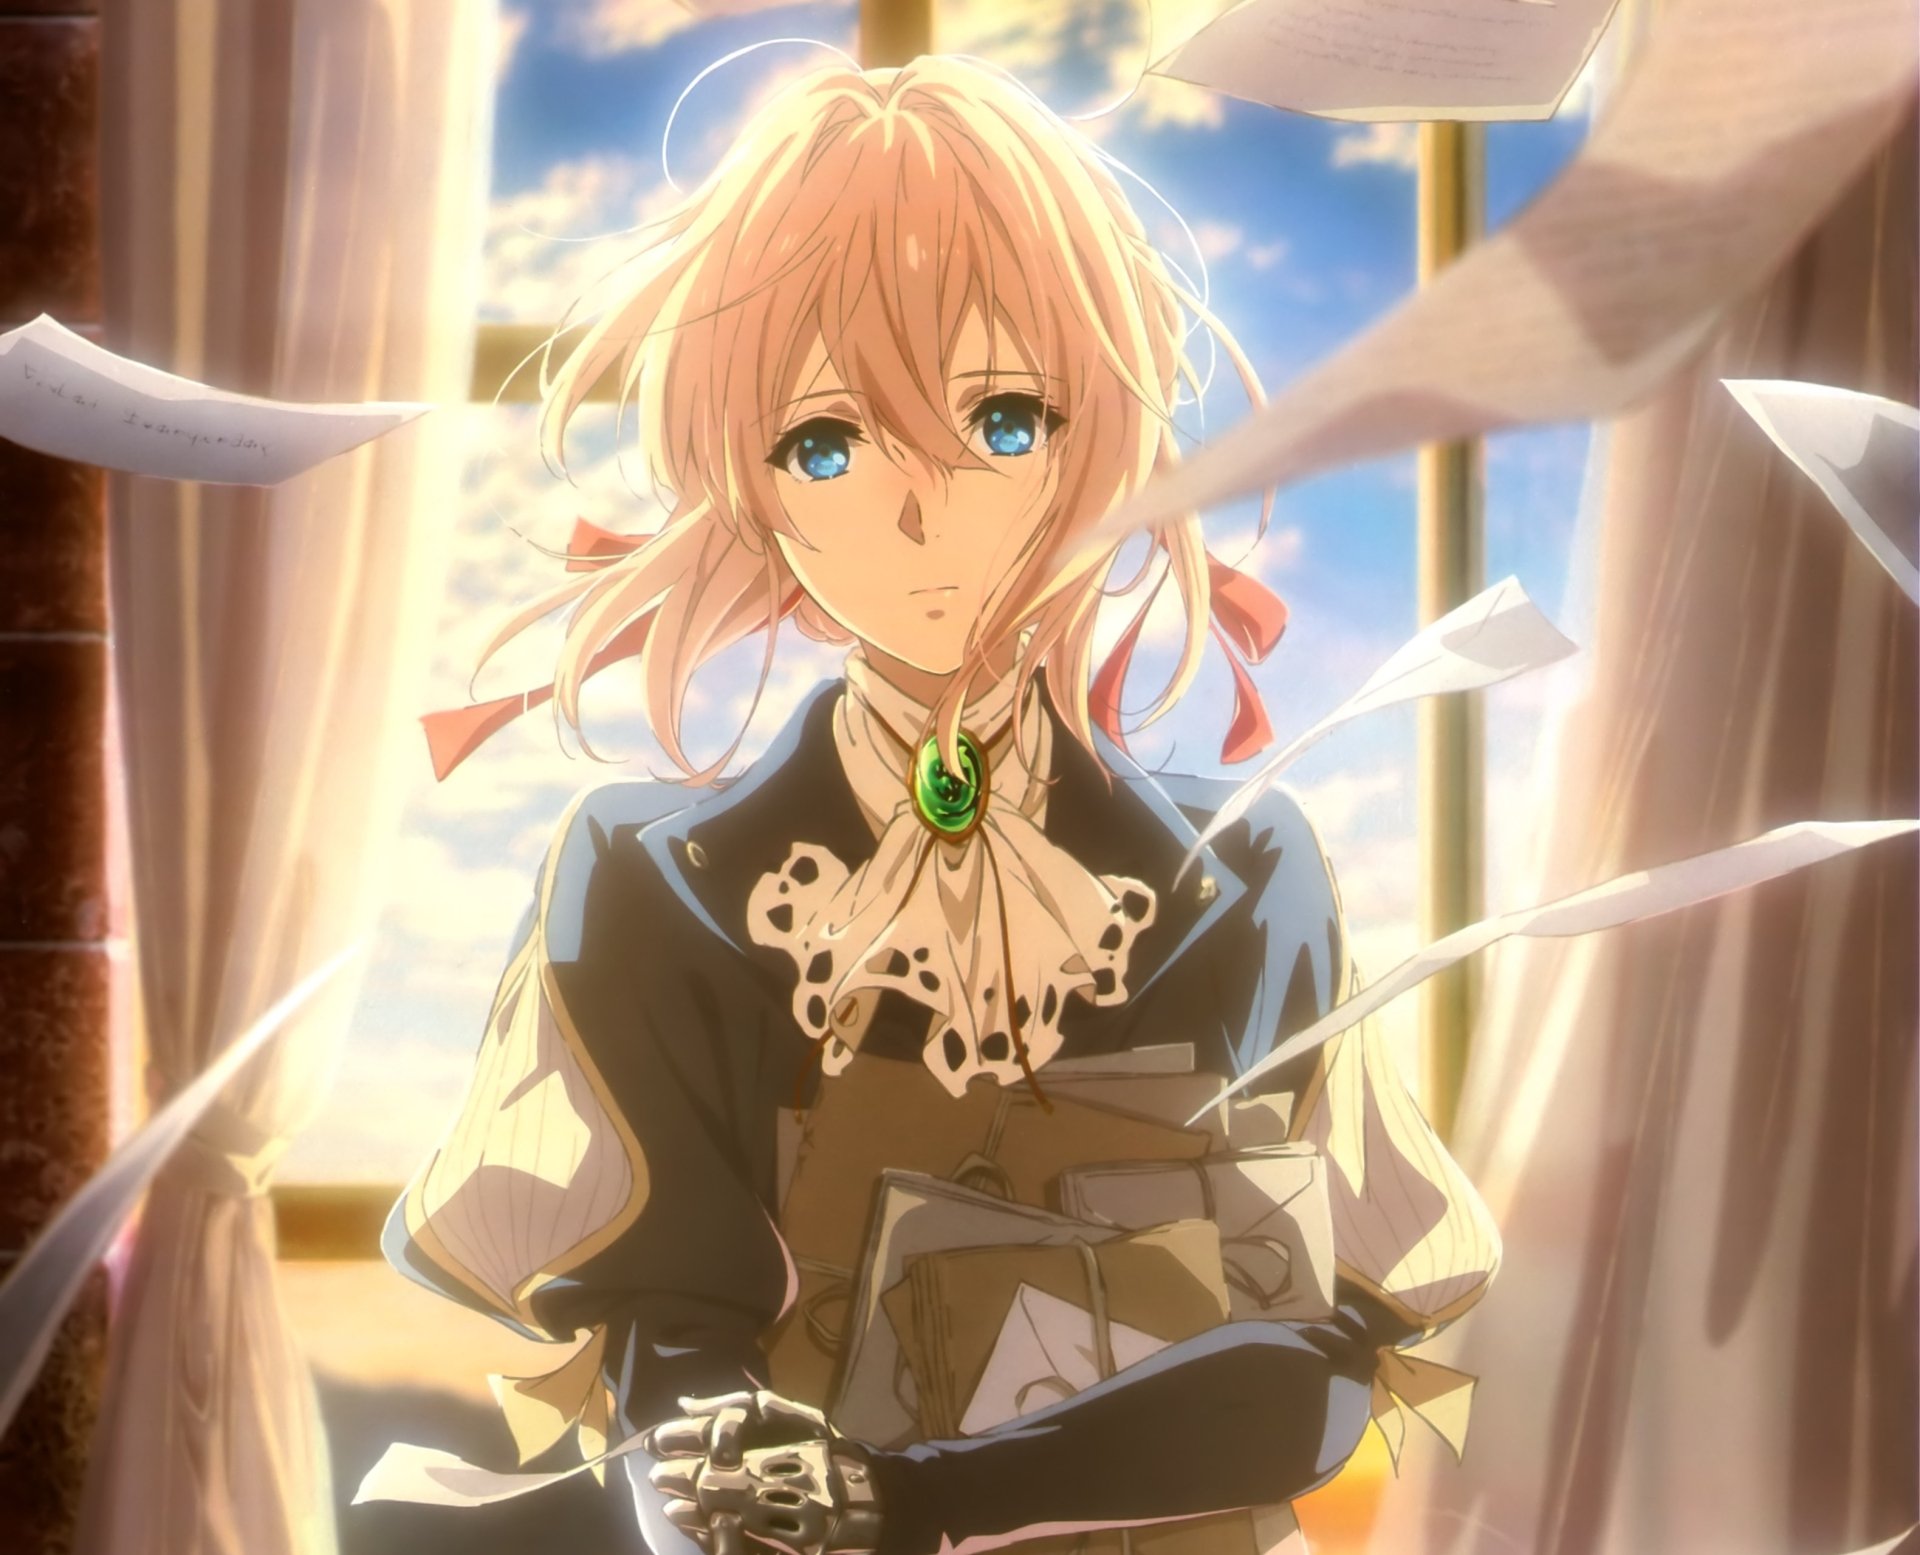 HD desktop wallpaper featuring Violet Evergarden, an anime character with blonde hair and blue eyes, standing in front of a bright window with scattered papers around her.